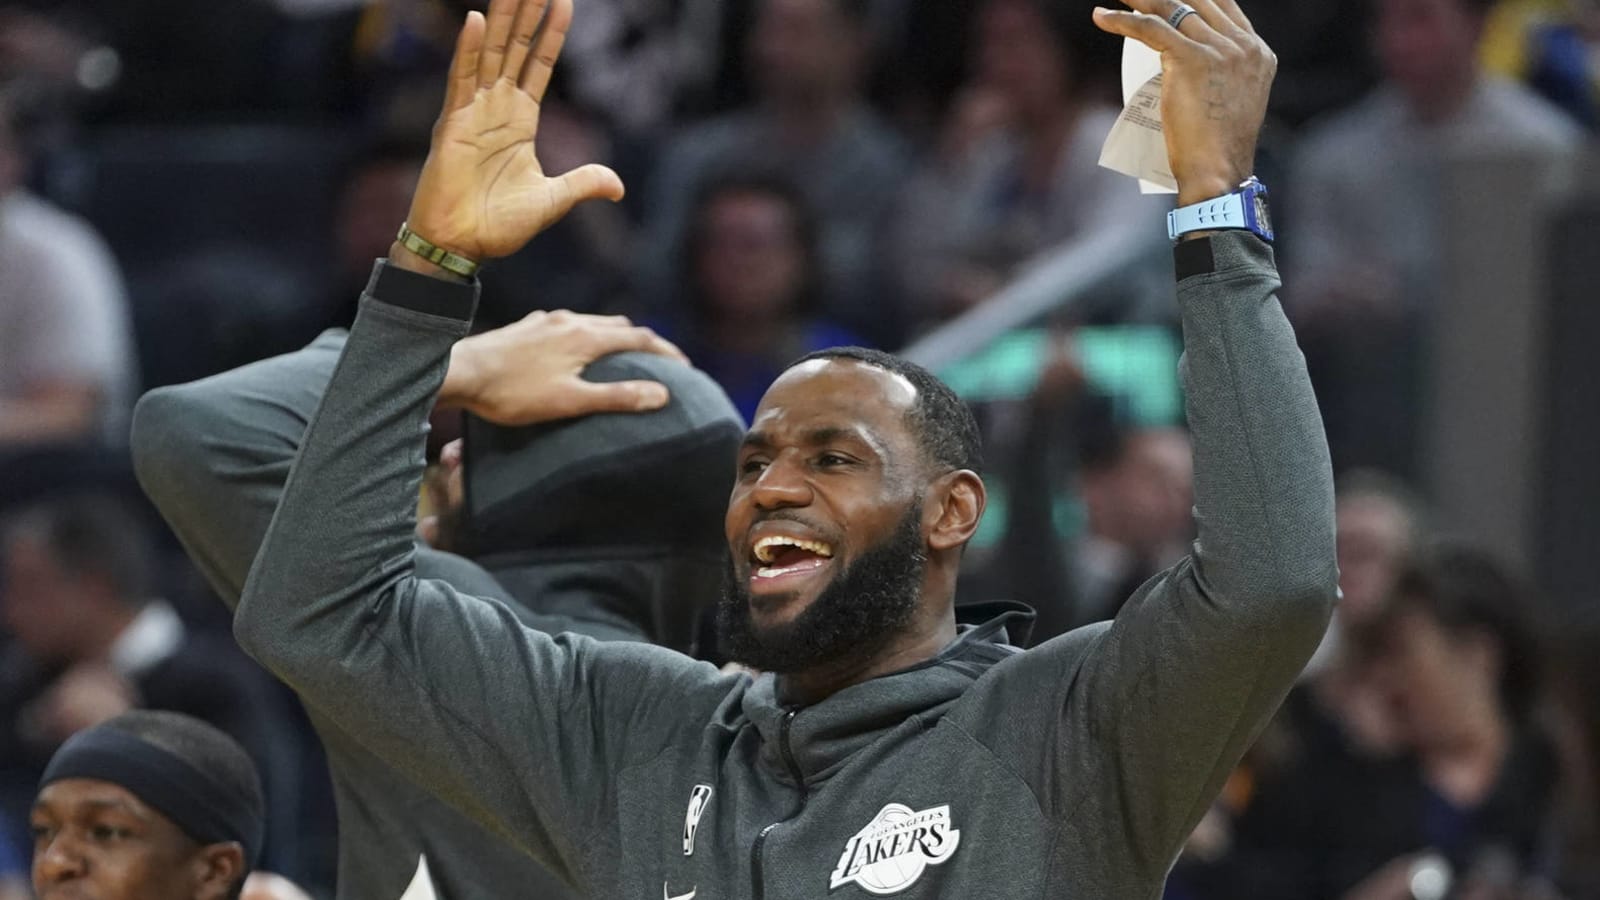 Watch: LeBron James yells 'let's go!' during singing of national anthem